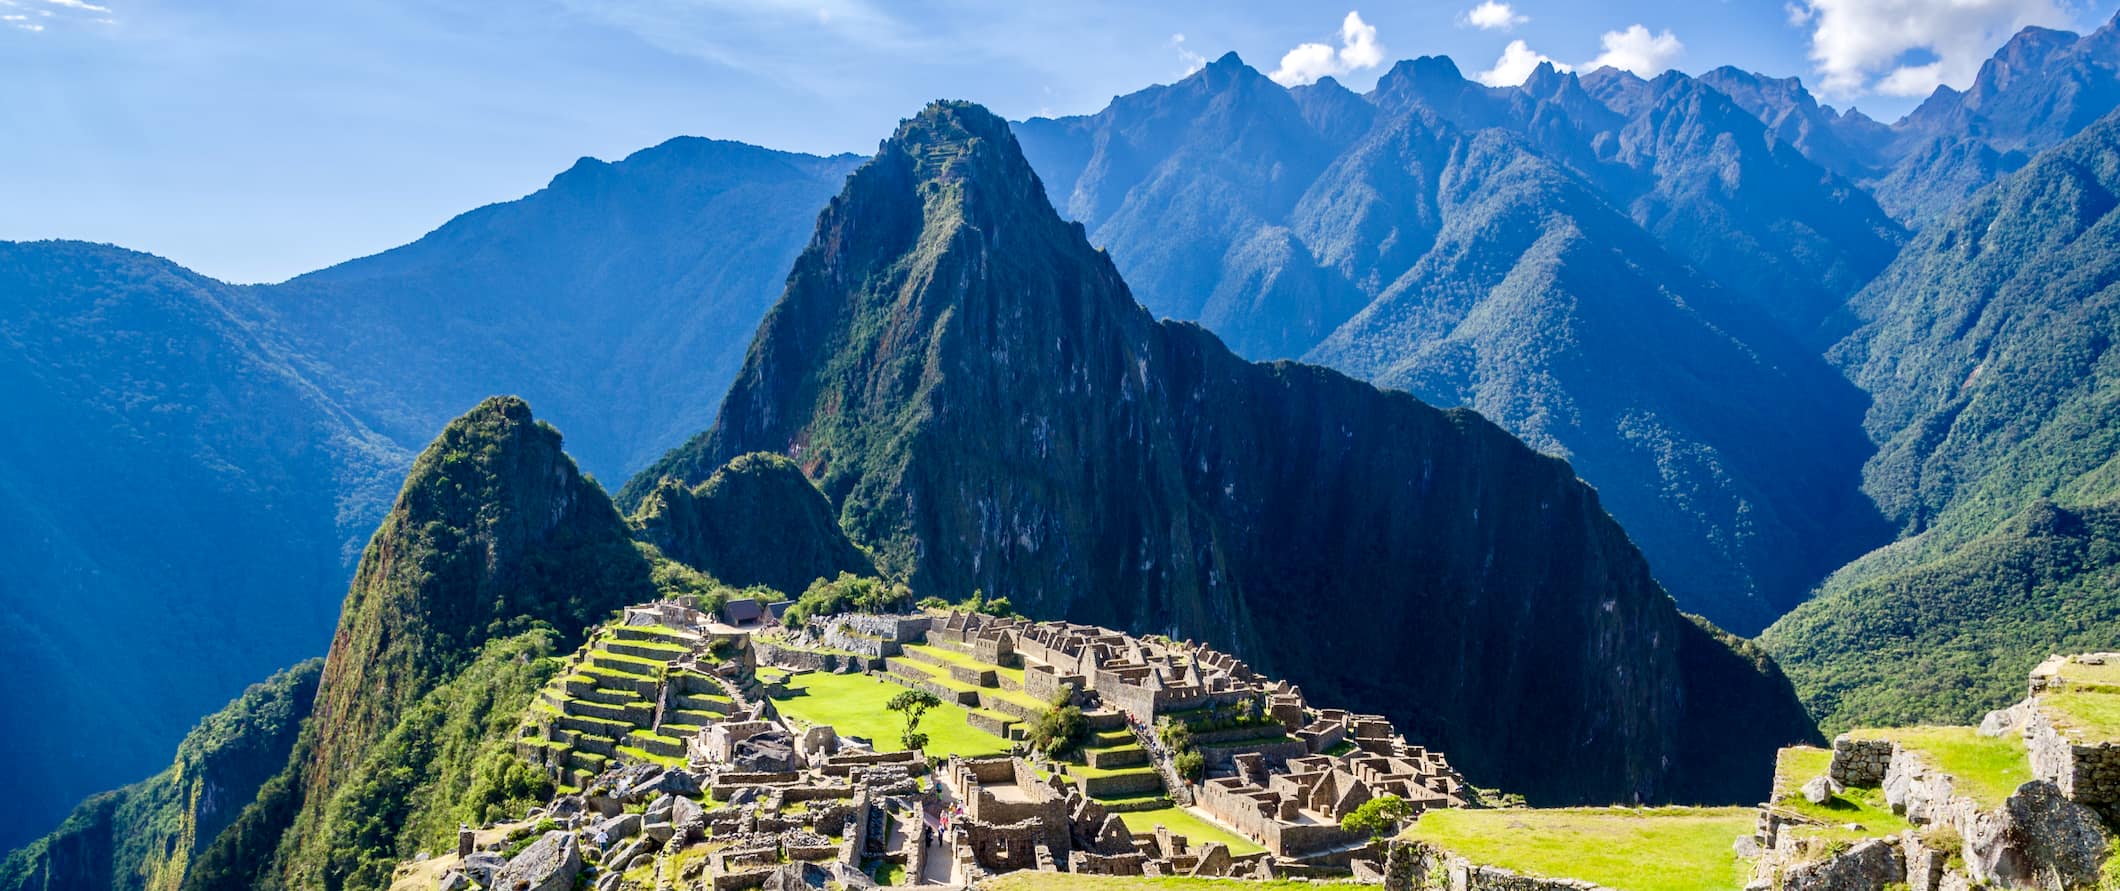 Machu Picchu, Peru with rolling mountains in the distance on a bright and sunny day